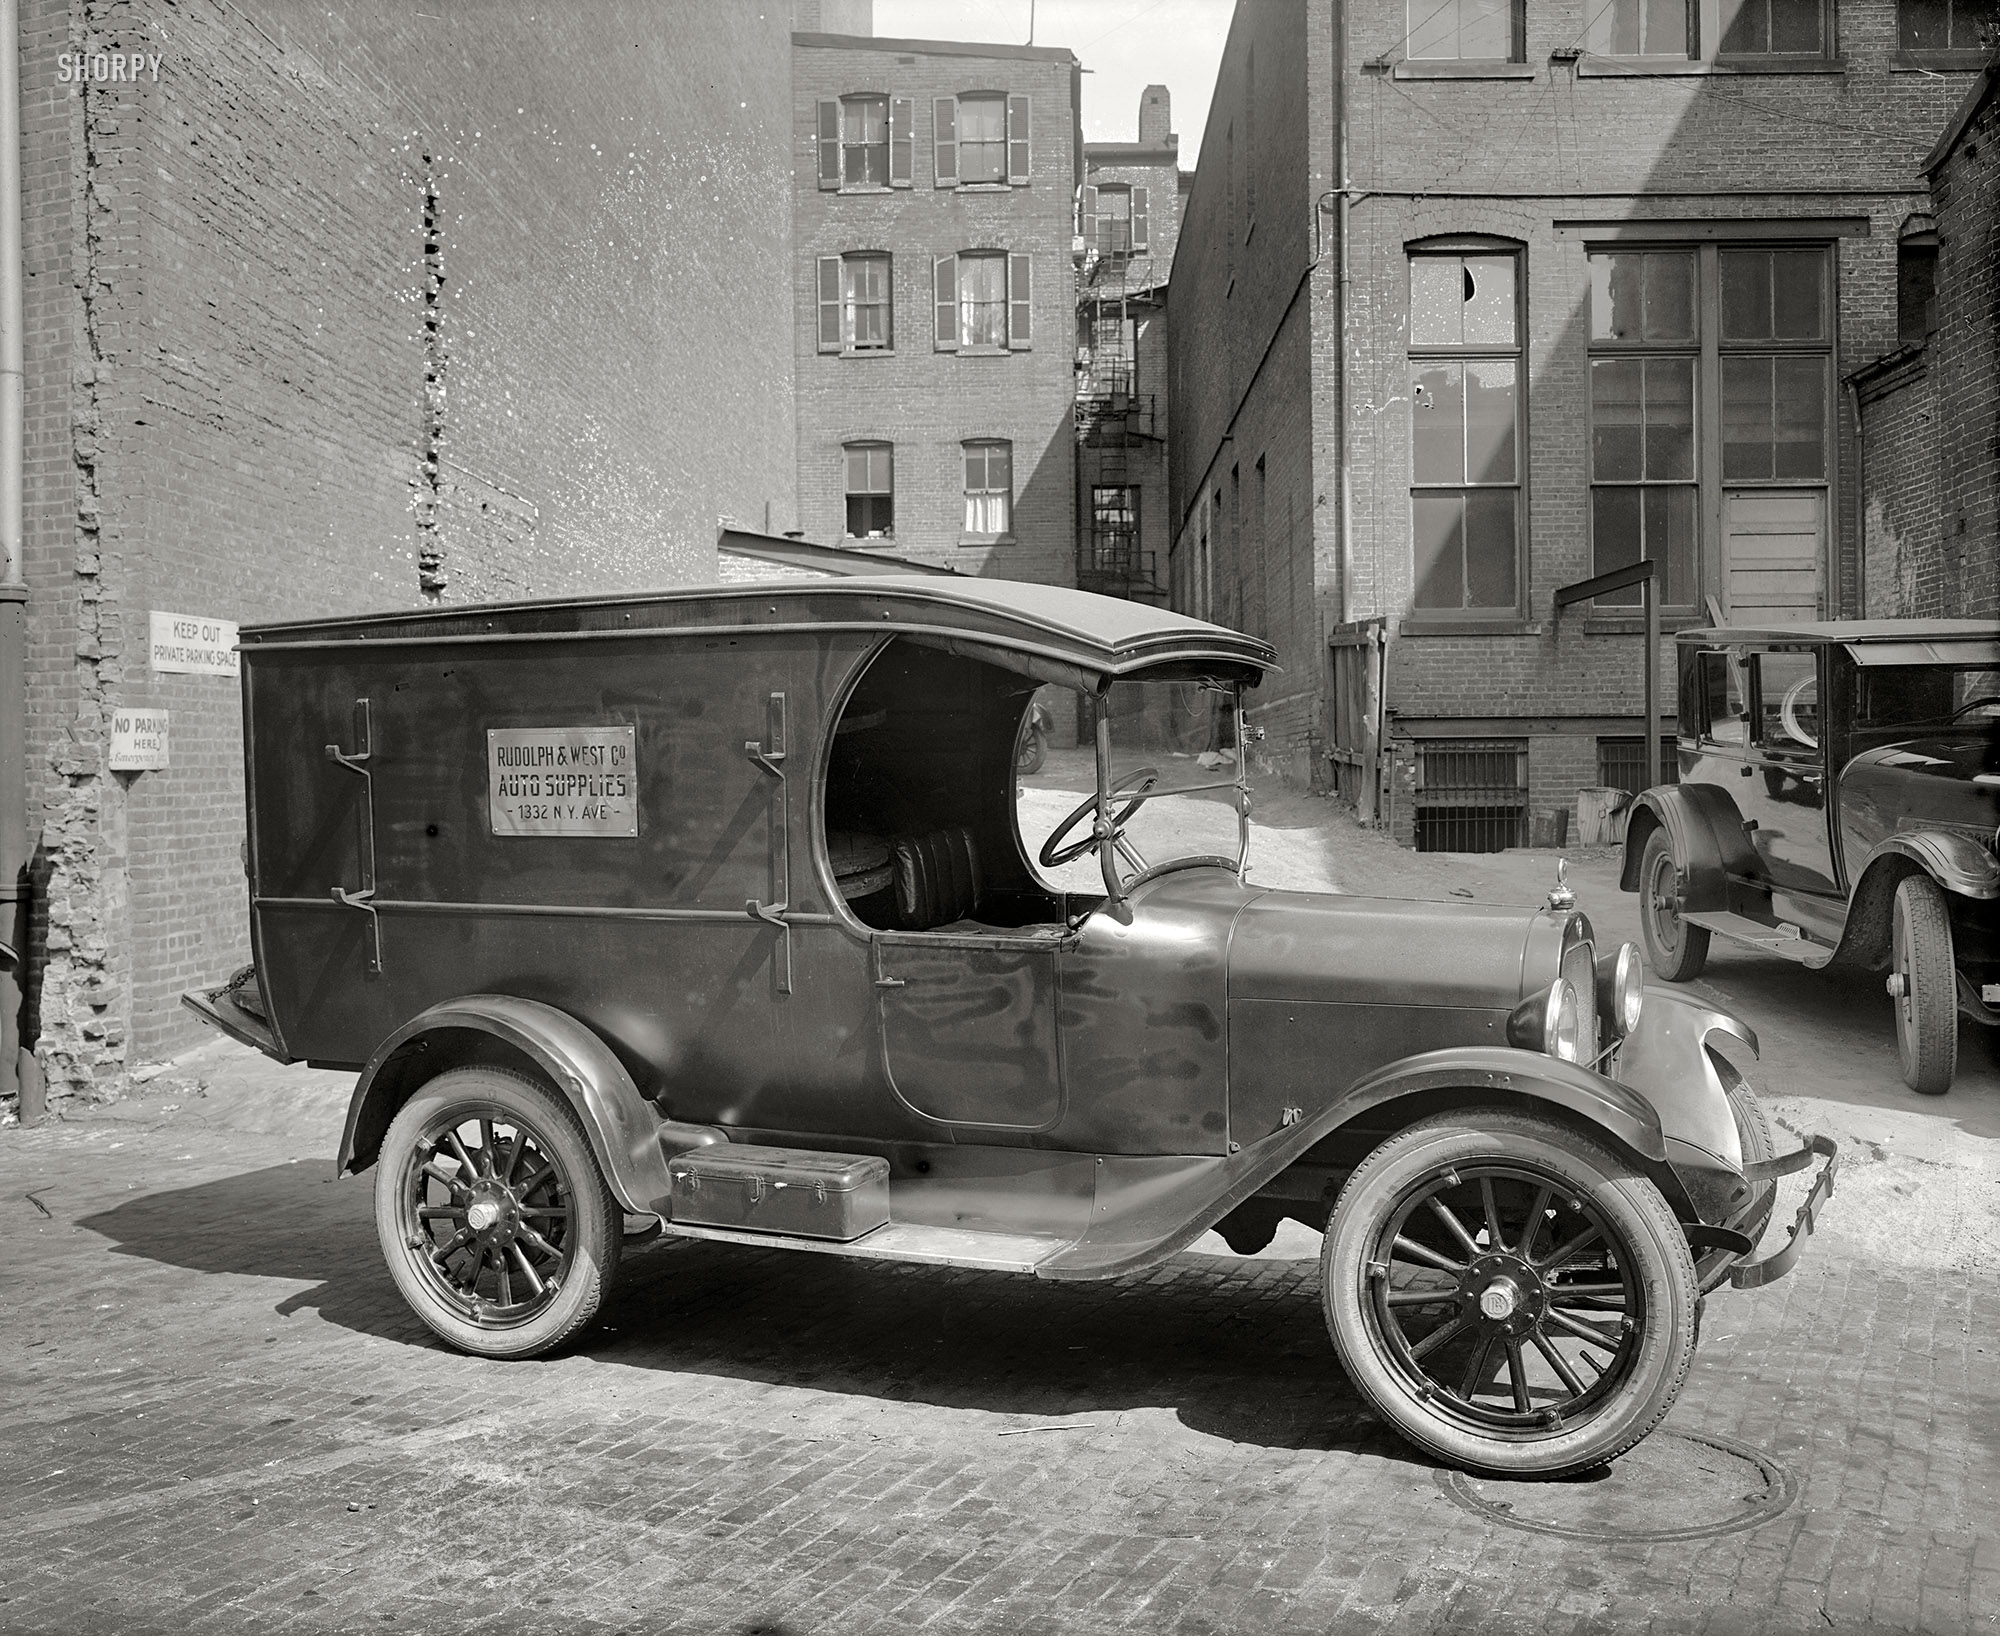 Washington, D.C., 1926. "Semmes Motor Co. -- Rudolph & West Co. truck." National Photo Company Collection glass negative. View full size.